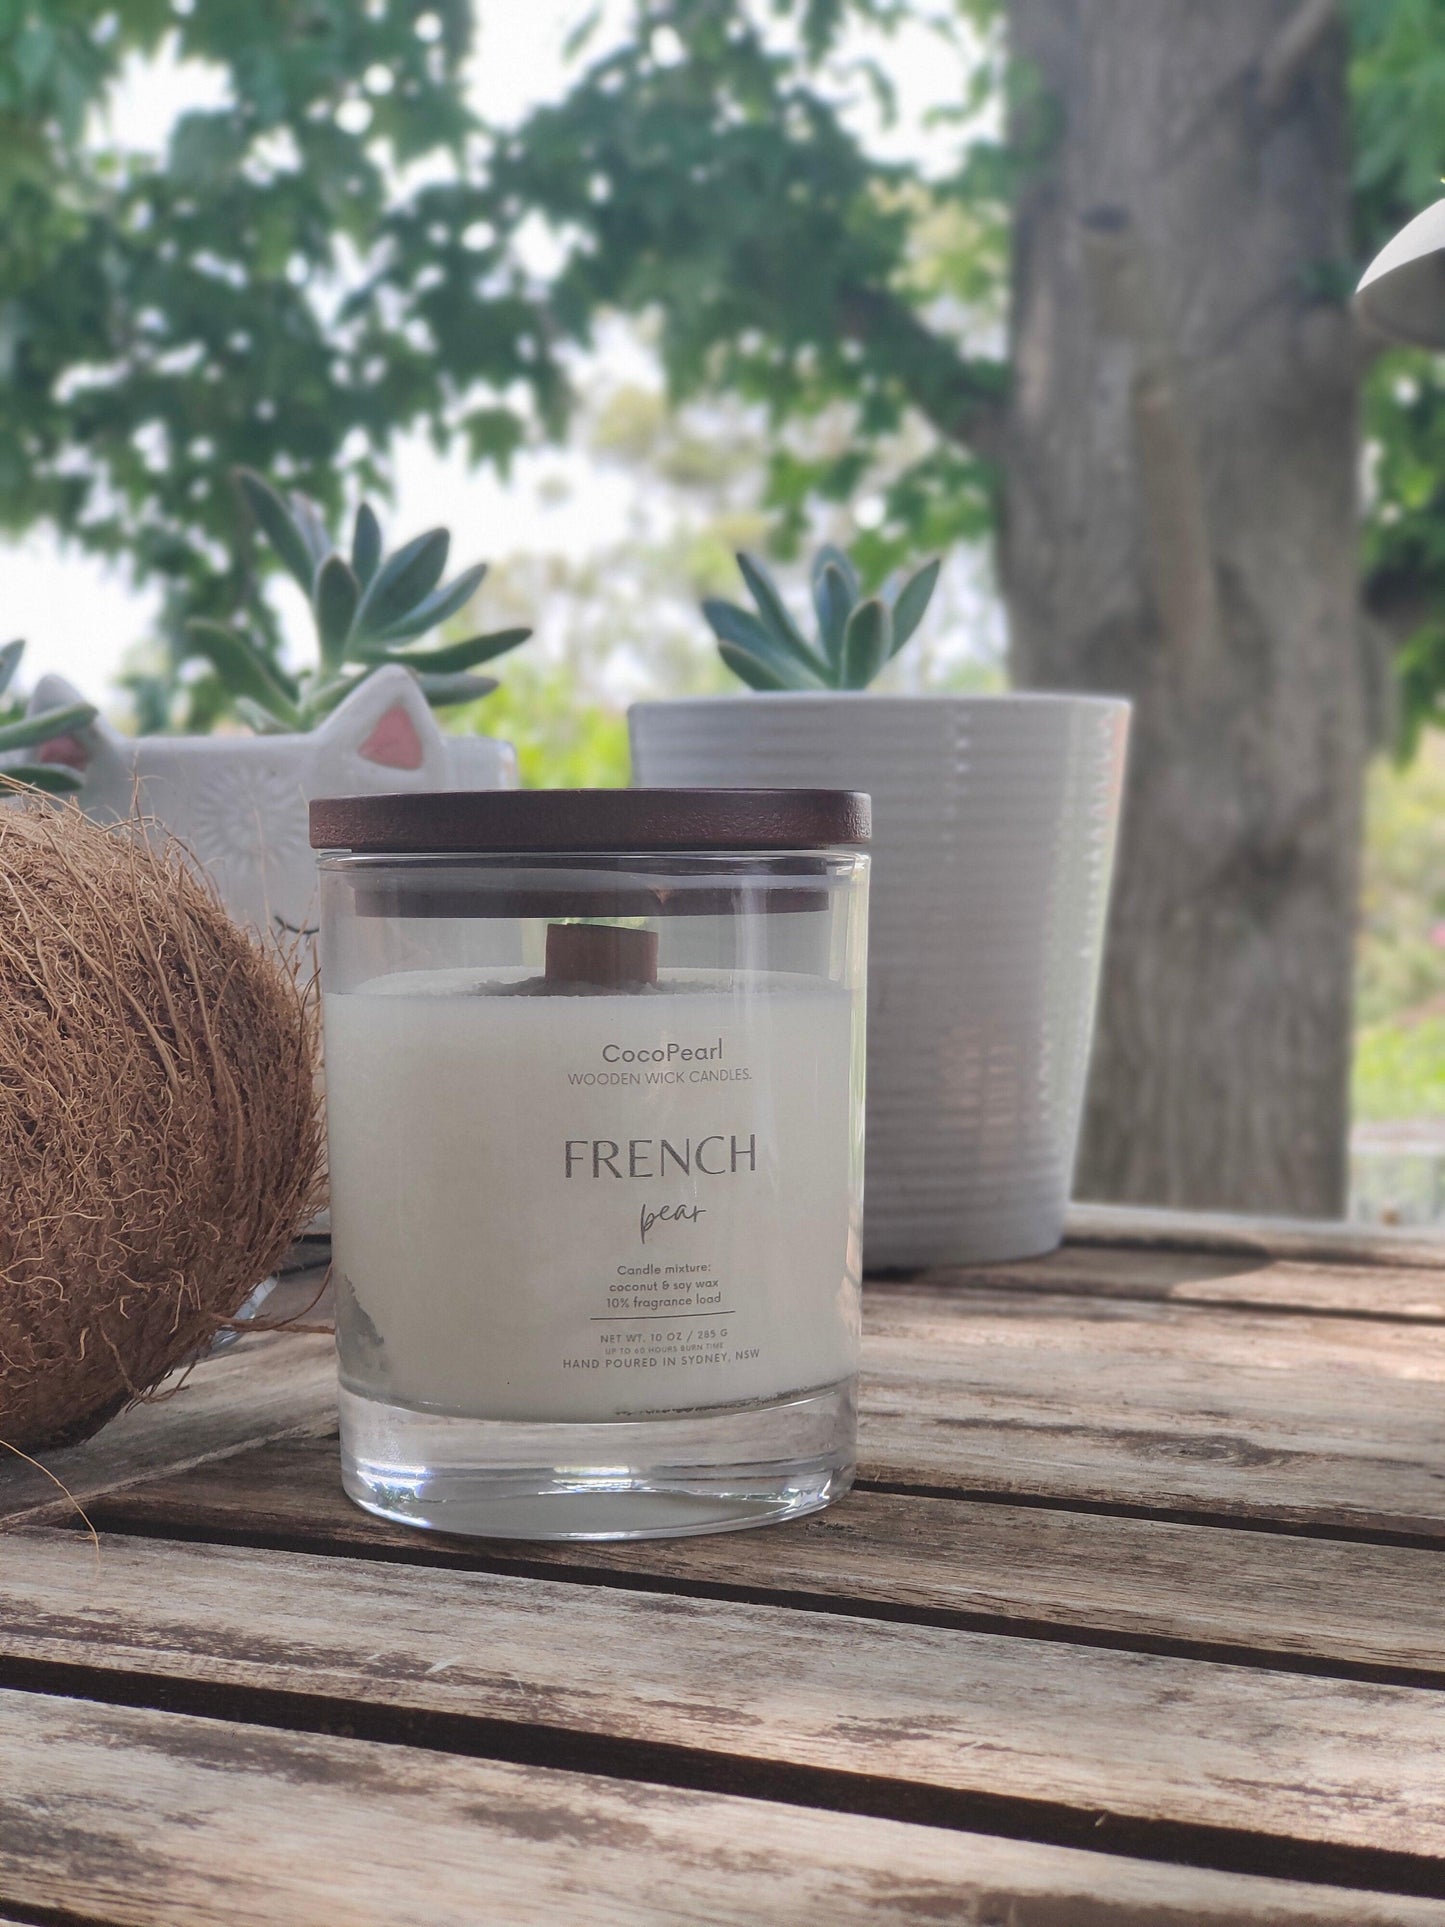 French pear | Wooden wick - CocoPearl Candles